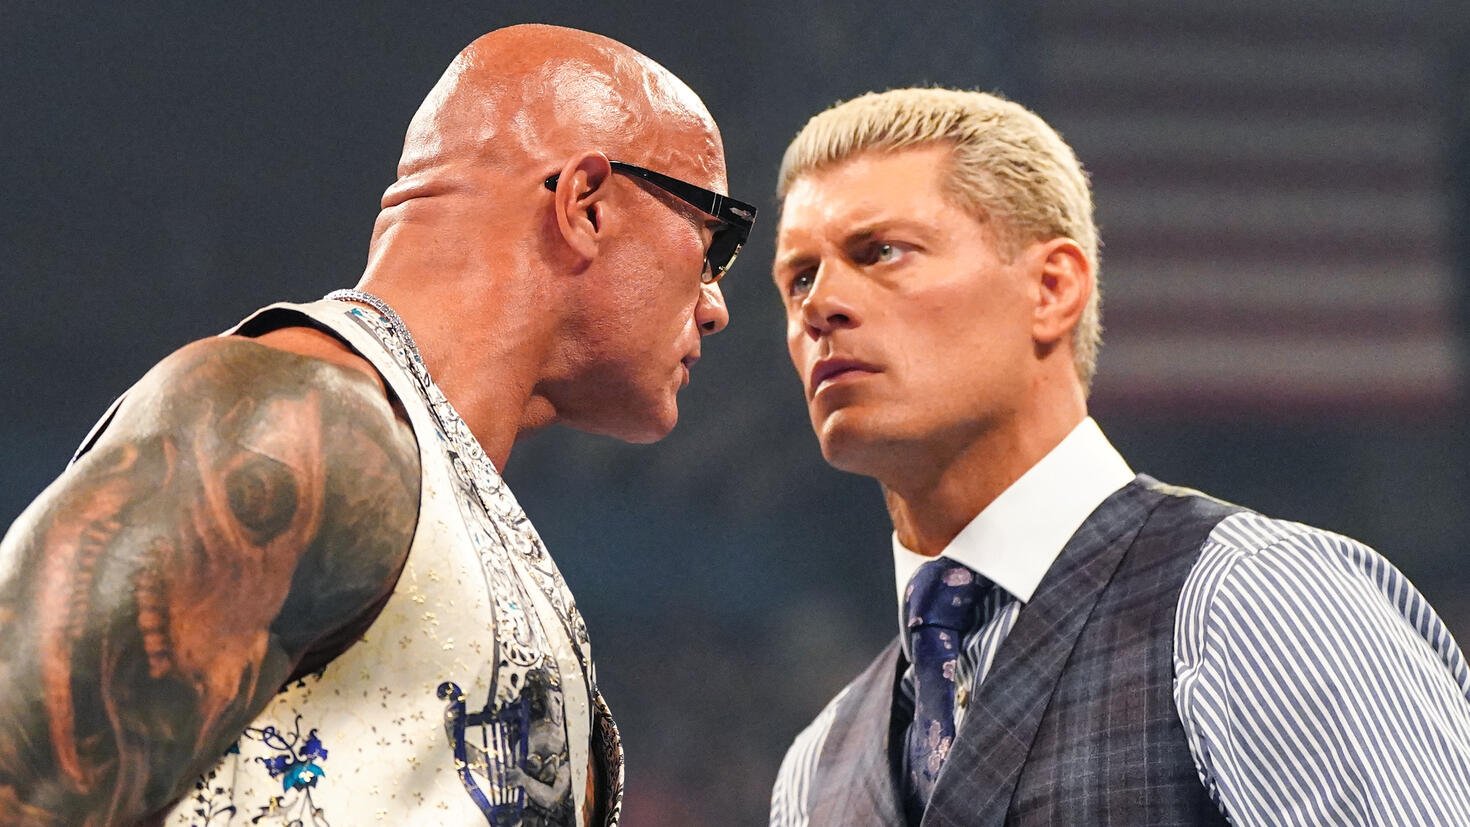 Cody Rhodes Shares His Emotional Response to Fans’ Reaction Towards the Planned Rock vs. Reigns Match